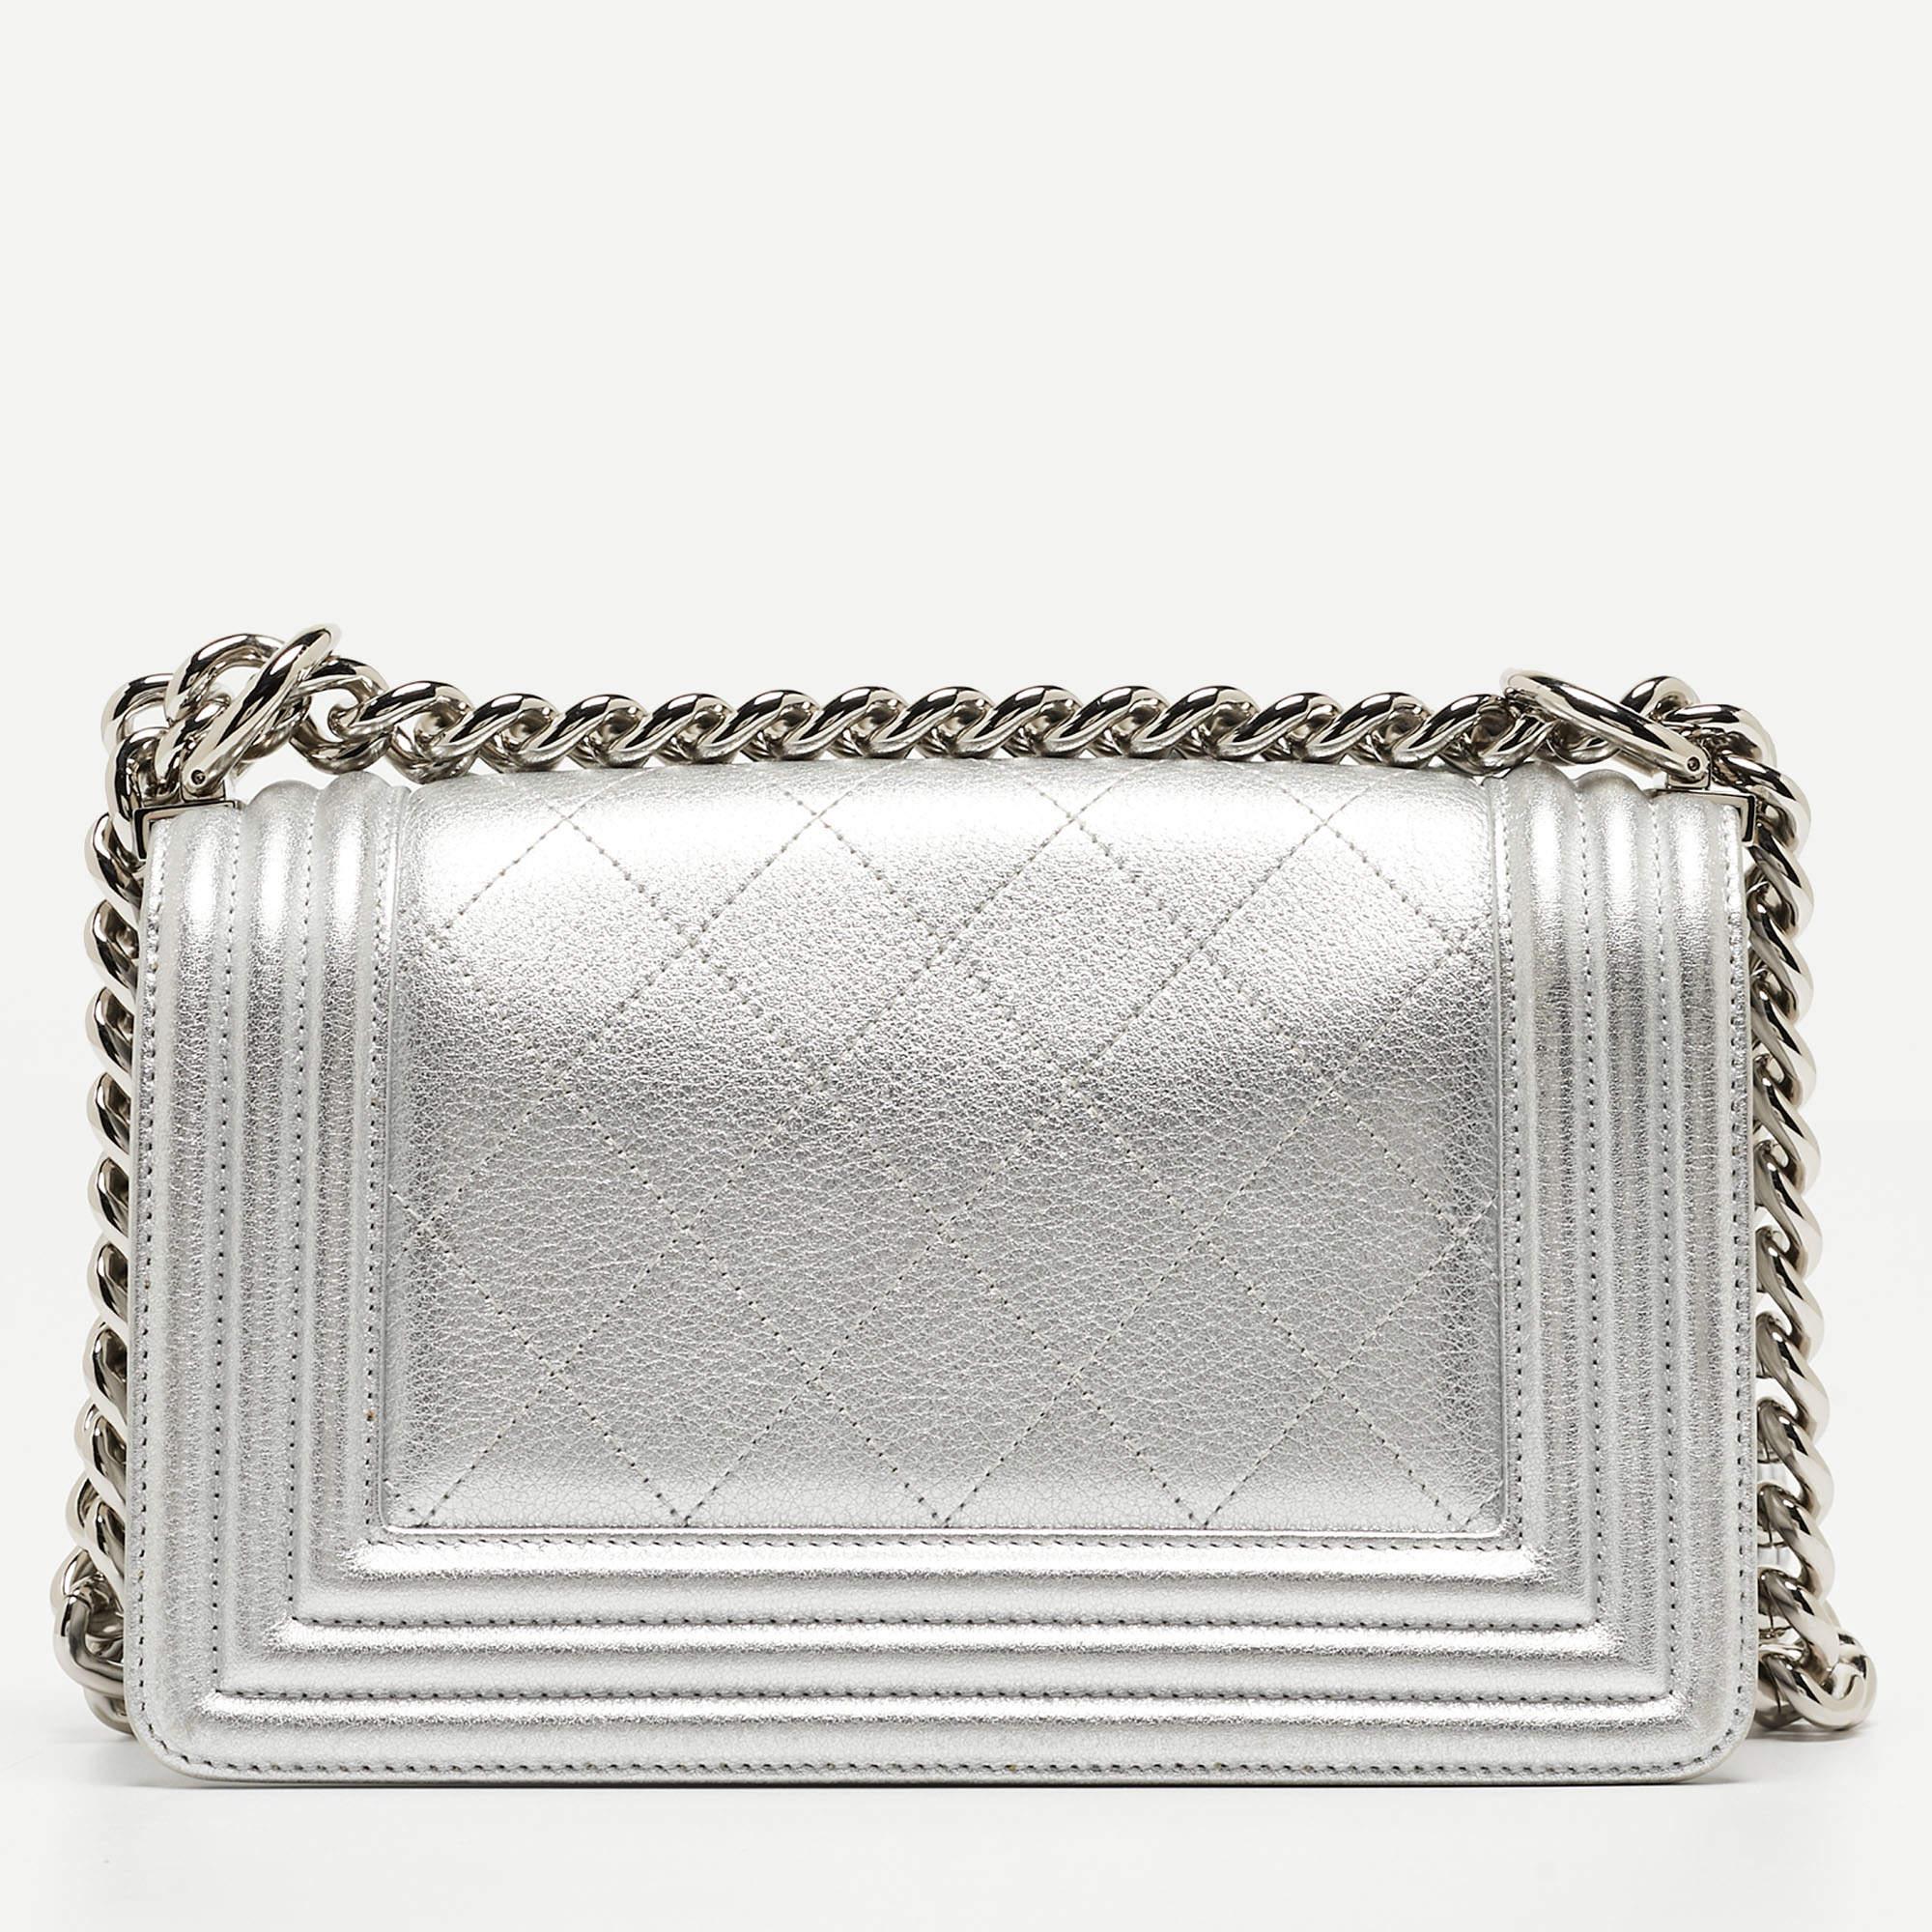 Chanel Silver Quilted Leather Small Camellia Applique Boy Flap Bag For Sale 2